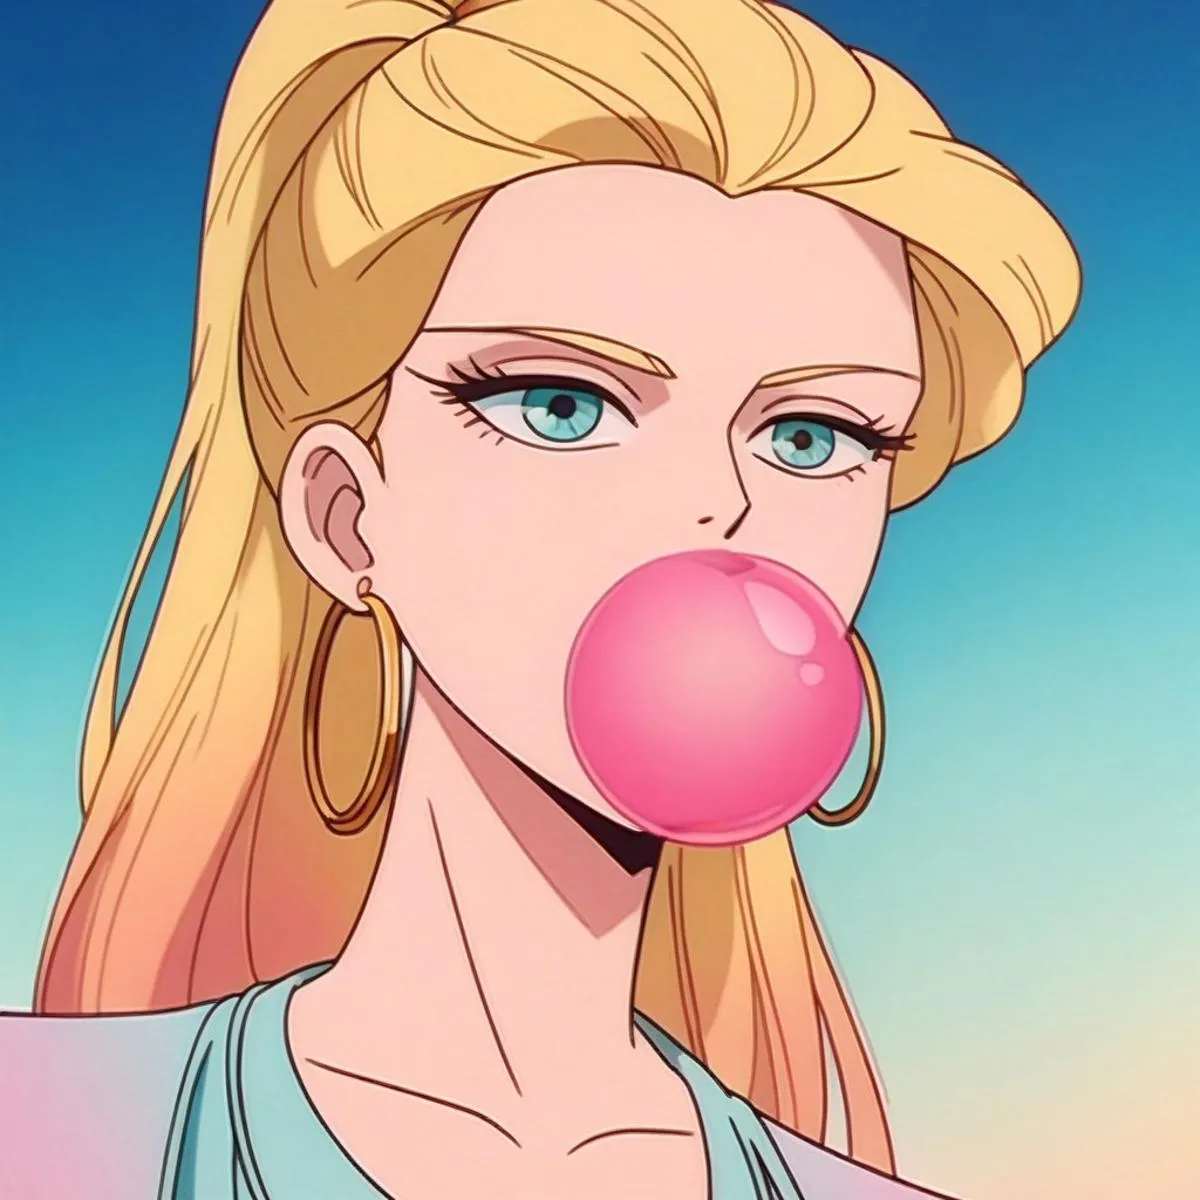 An anime girl with long blonde hair blowing a pink bubblegum bubble. This is an AI generated image using Stable Diffusion.